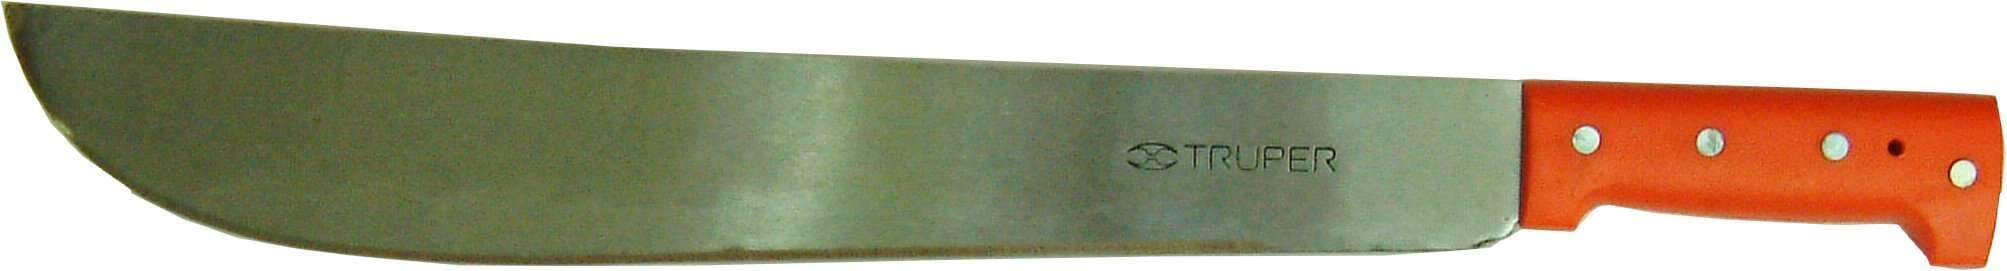 Truper Machette with Rivetted Handle 400mm